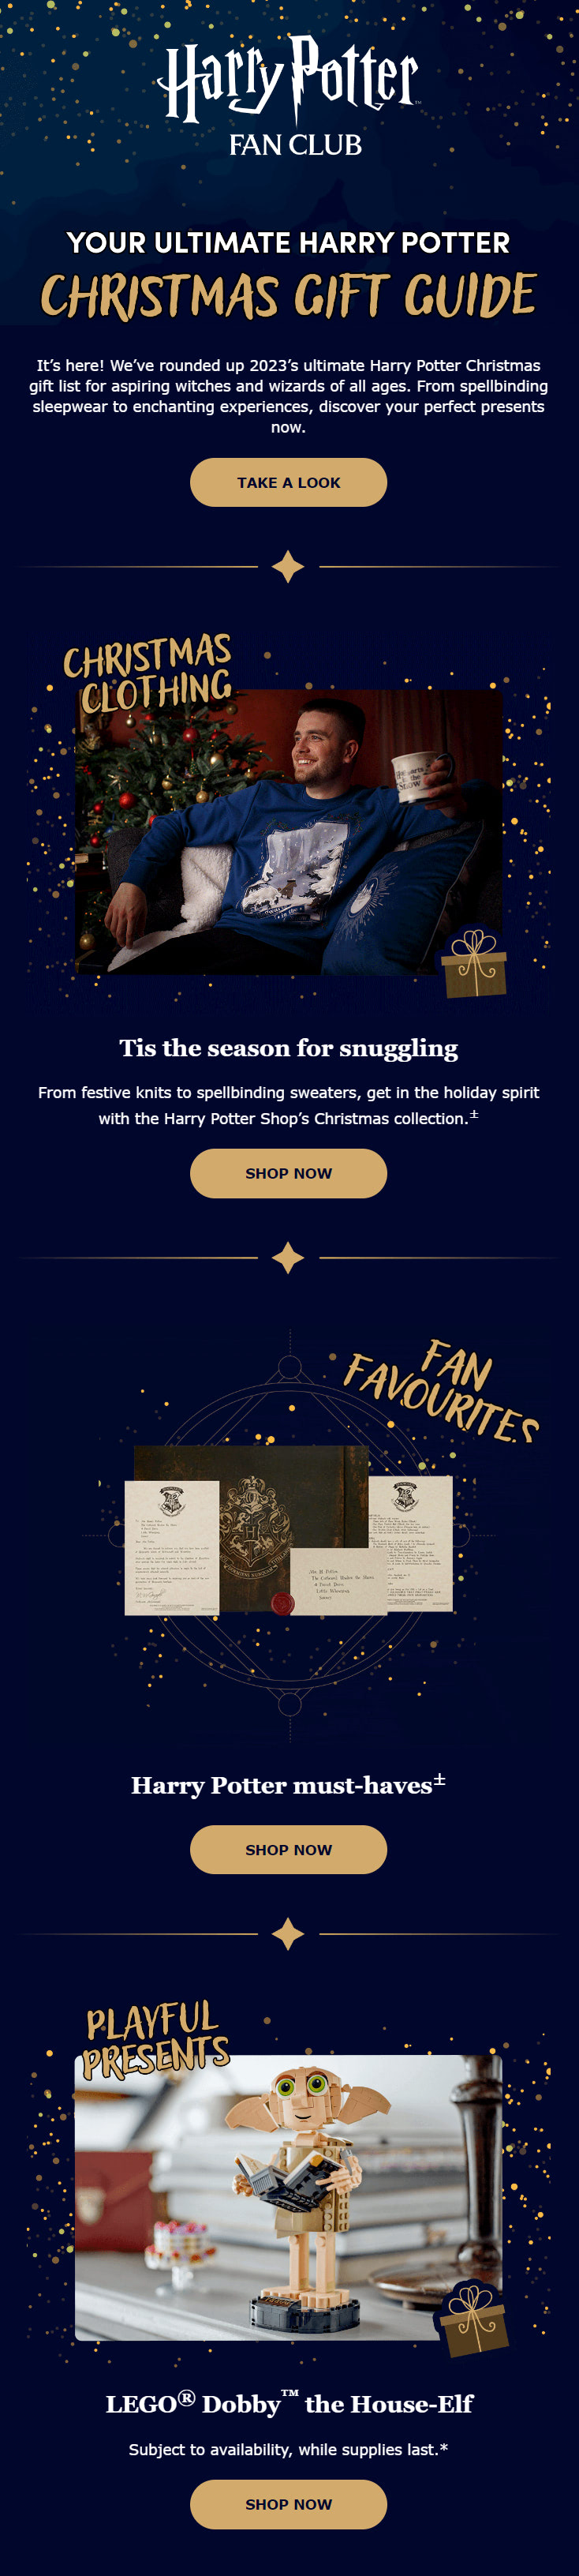 Email from Wizarding World